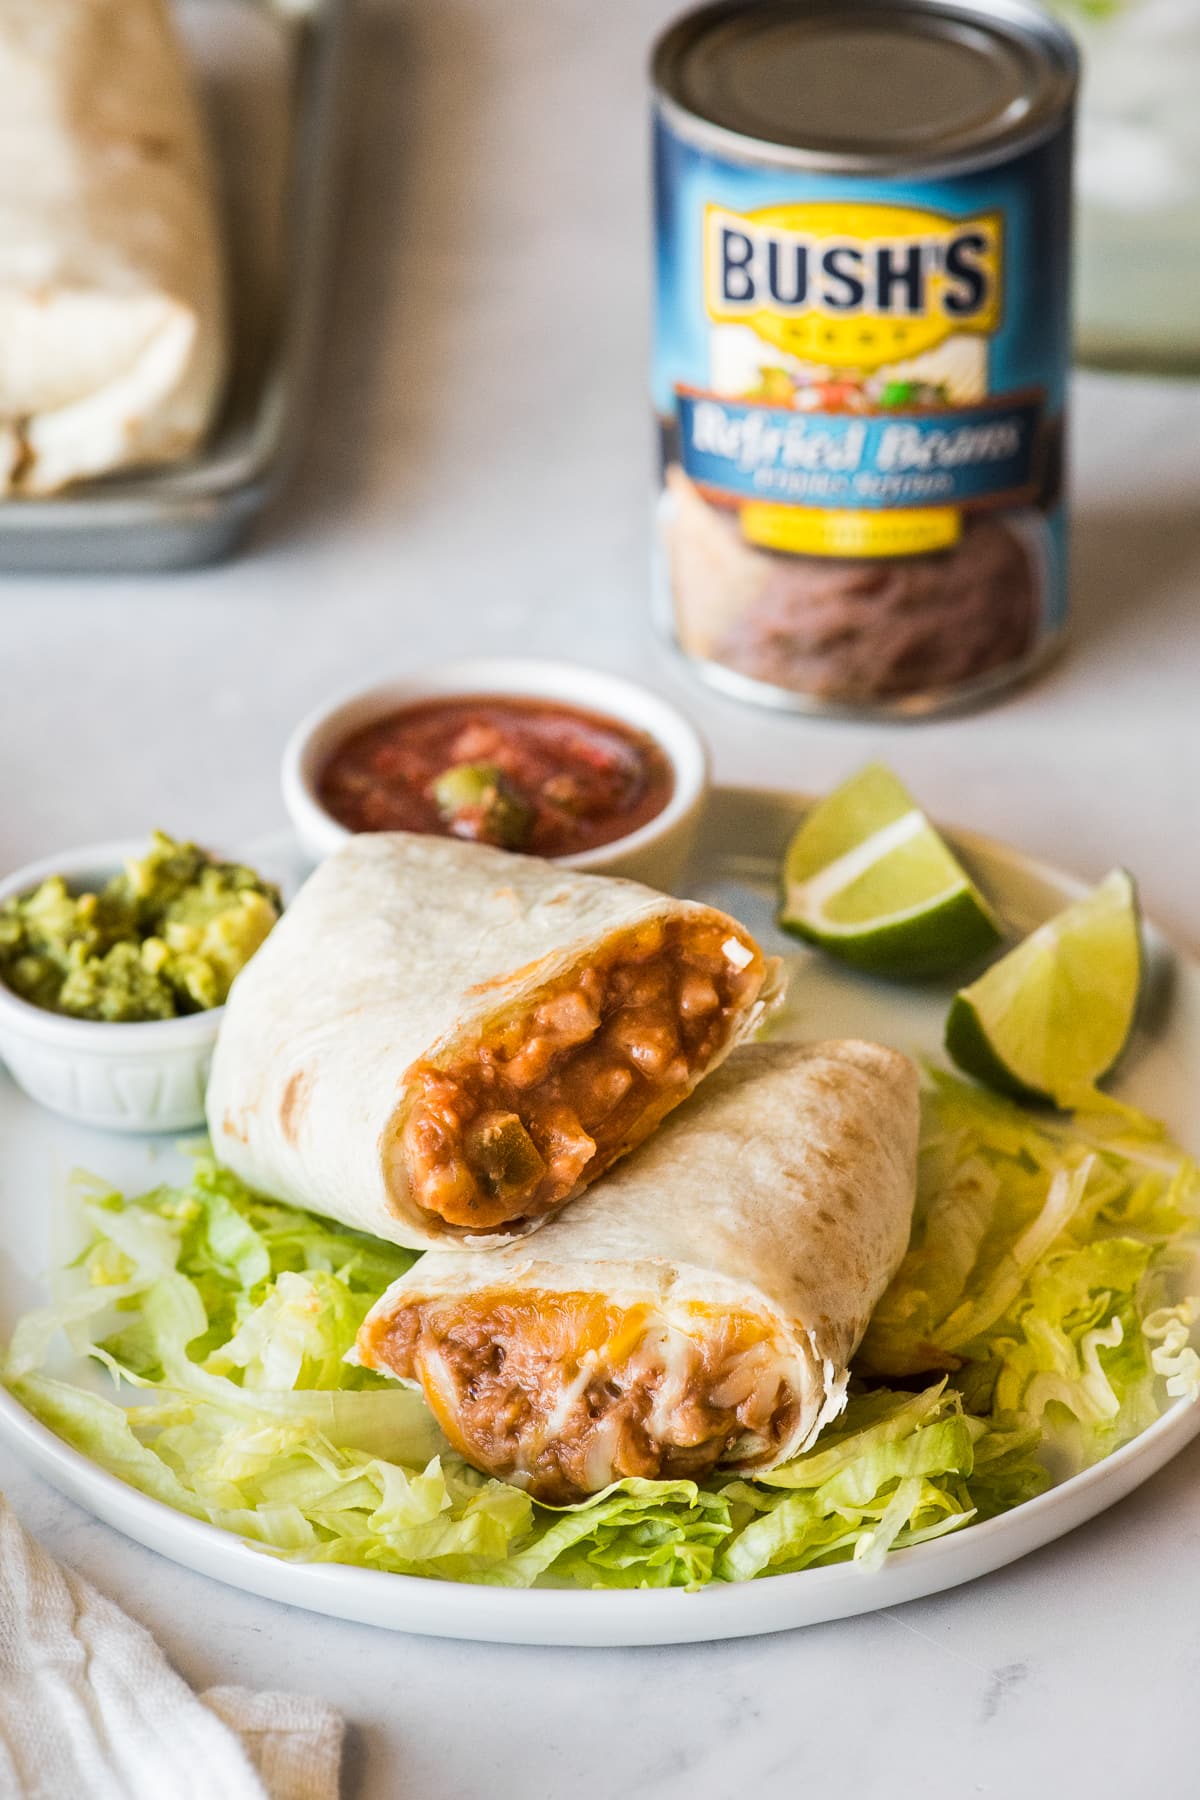 A bean and cheese burrito cut in half and stacked on a plate with lettuce.